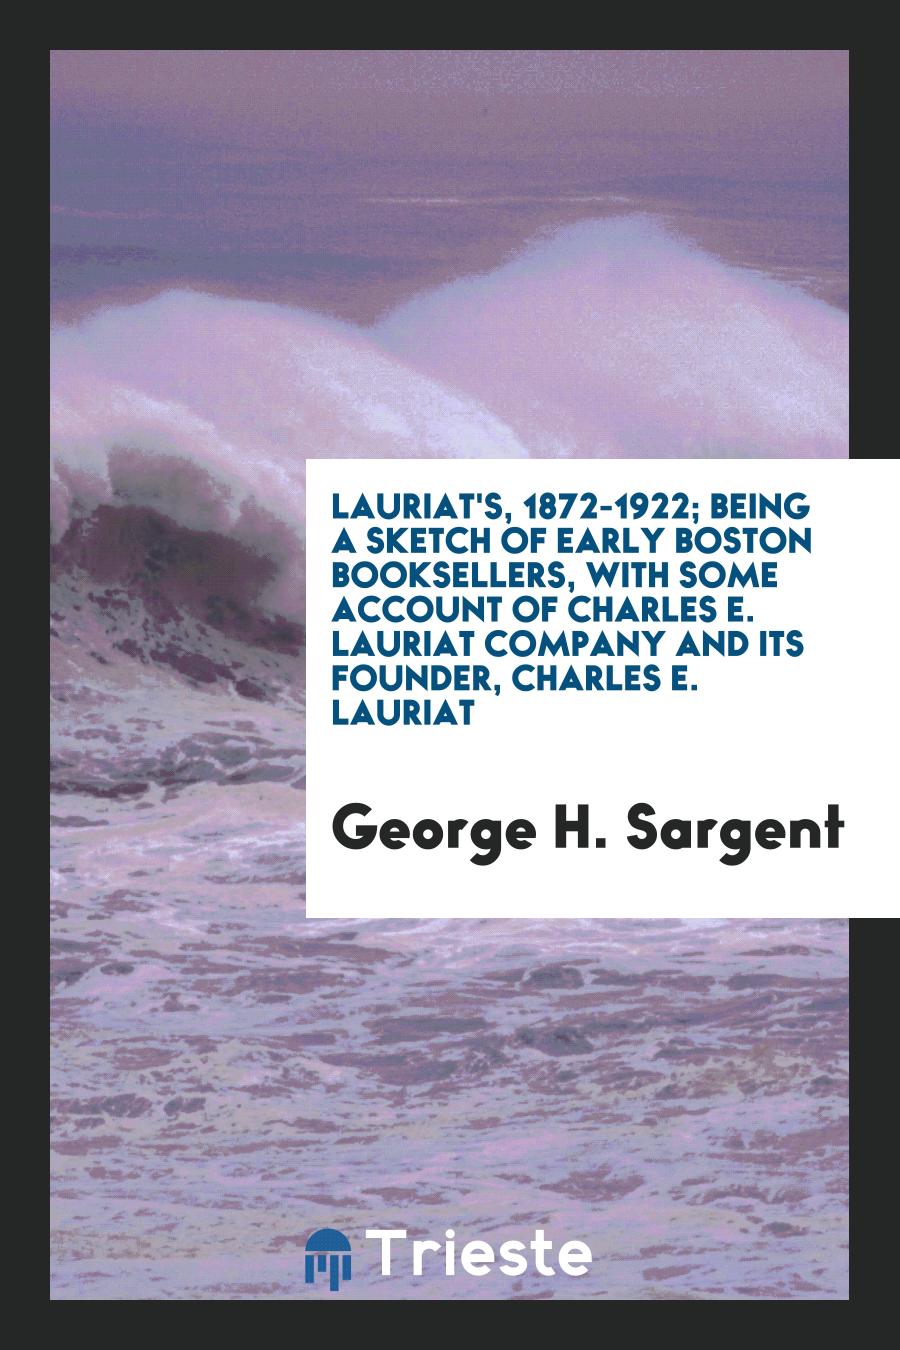 Lauriat's, 1872-1922; being a sketch of early Boston booksellers, with some account of Charles E. Lauriat company and its founder, Charles E. Lauriat